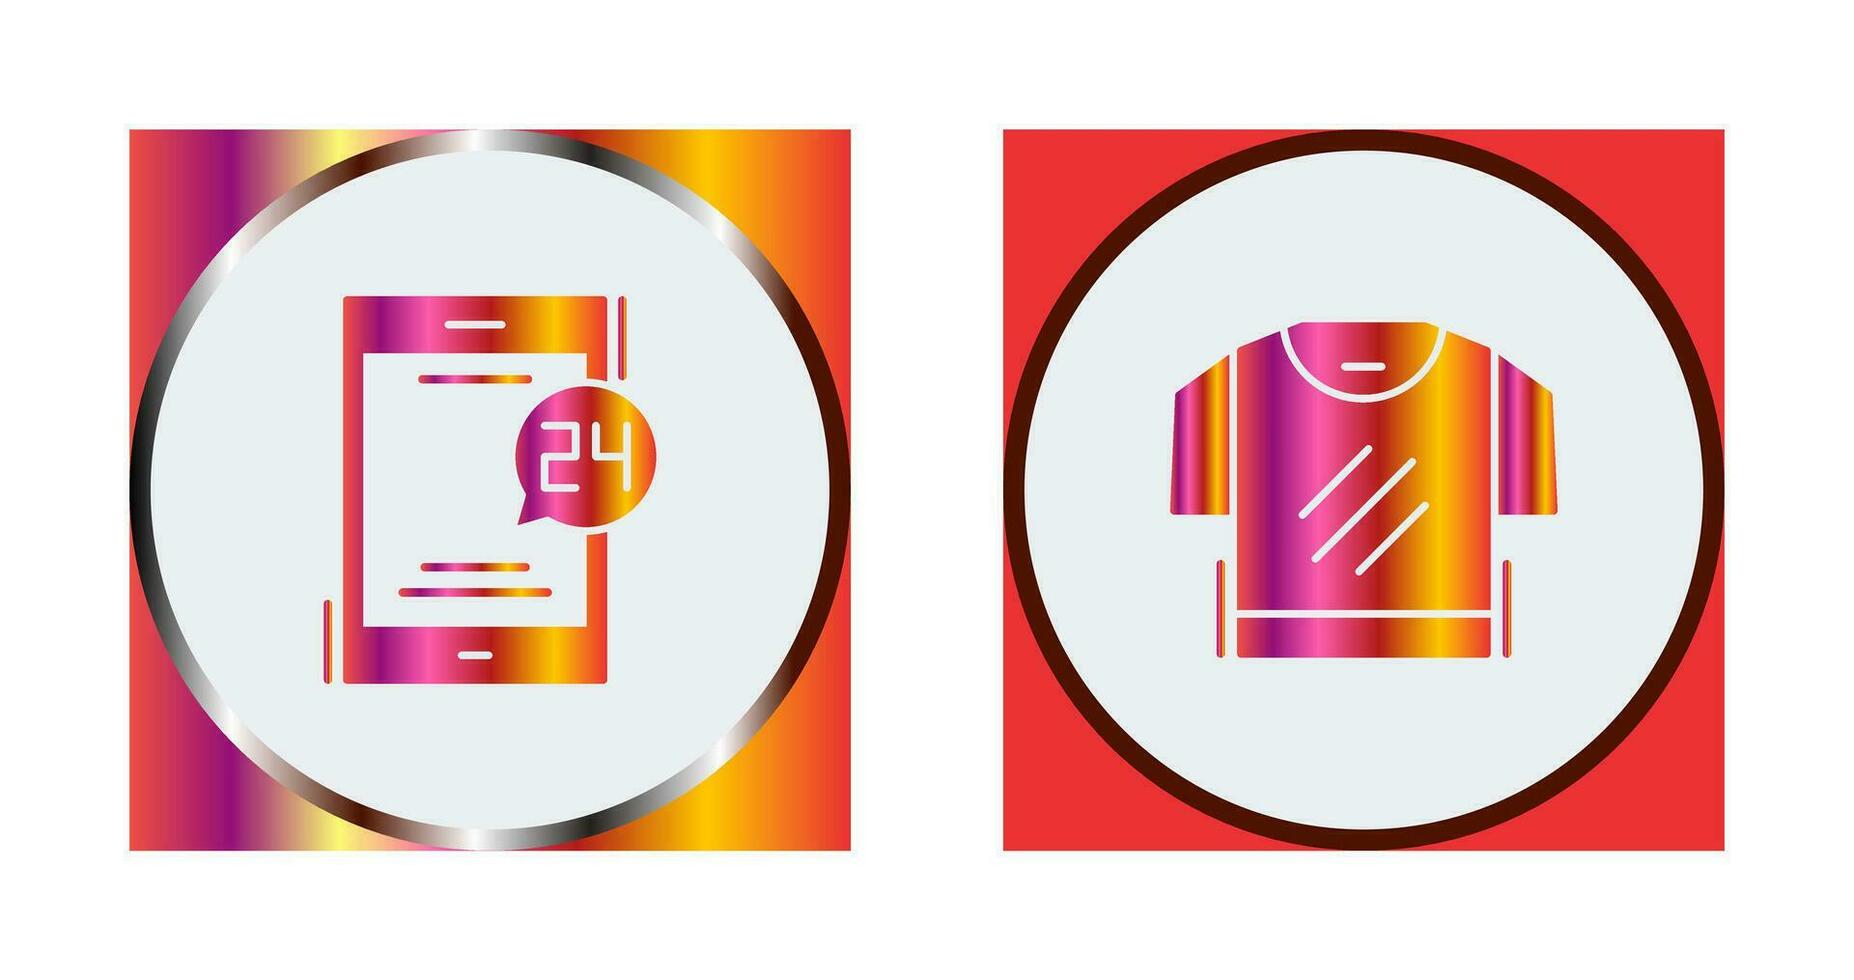 24 Hours and TShirt Icon vector